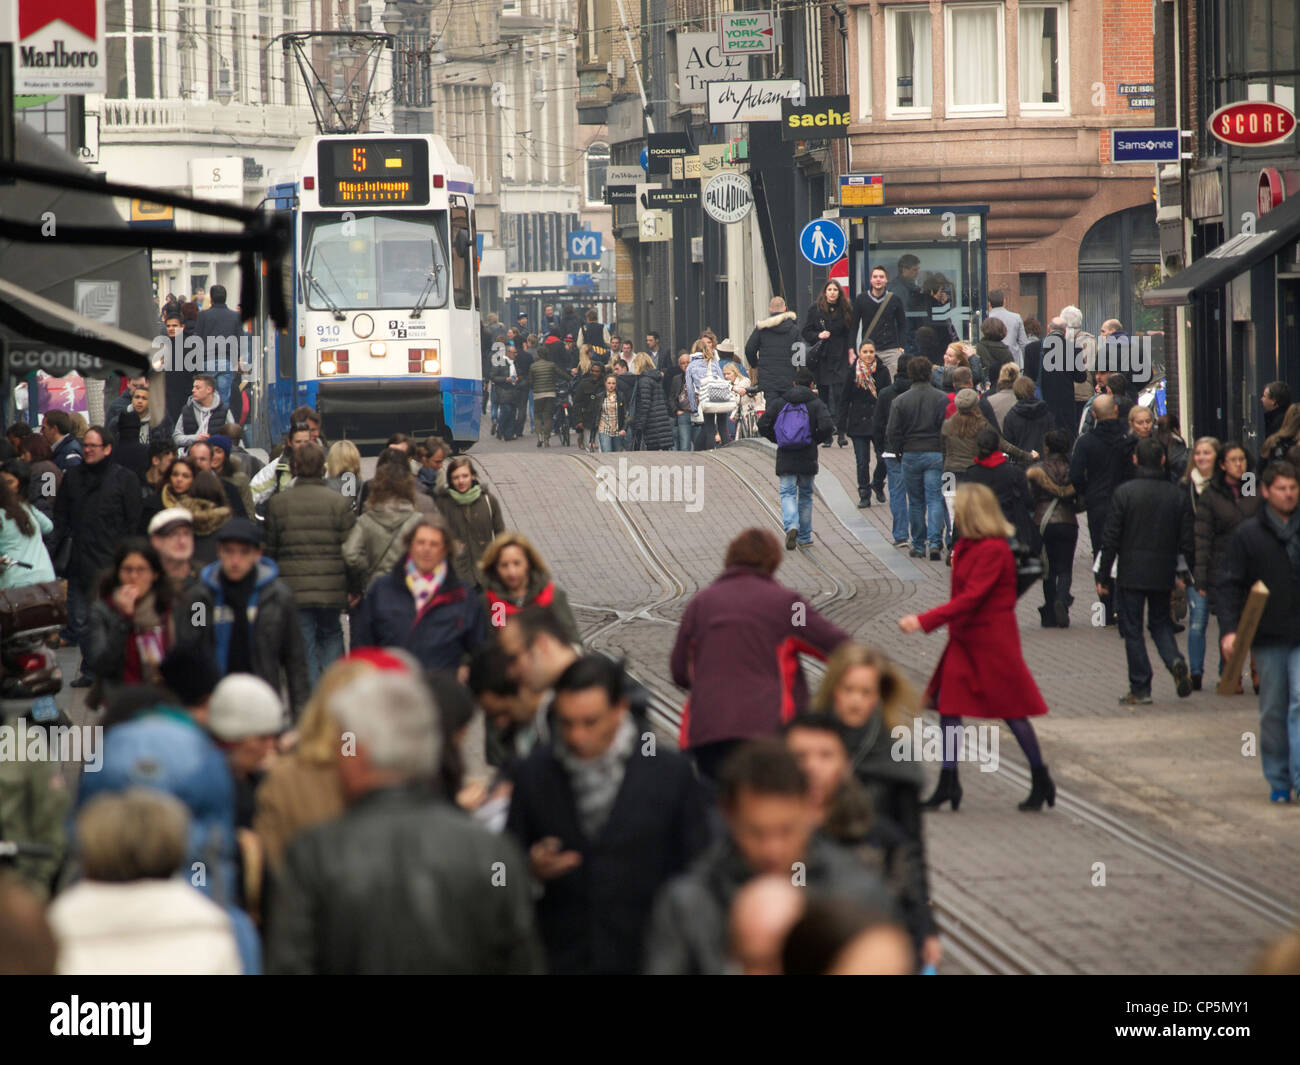 Shopping crowds in the Leidsestraat in Amsterdam, the Netherlands Stock Photo